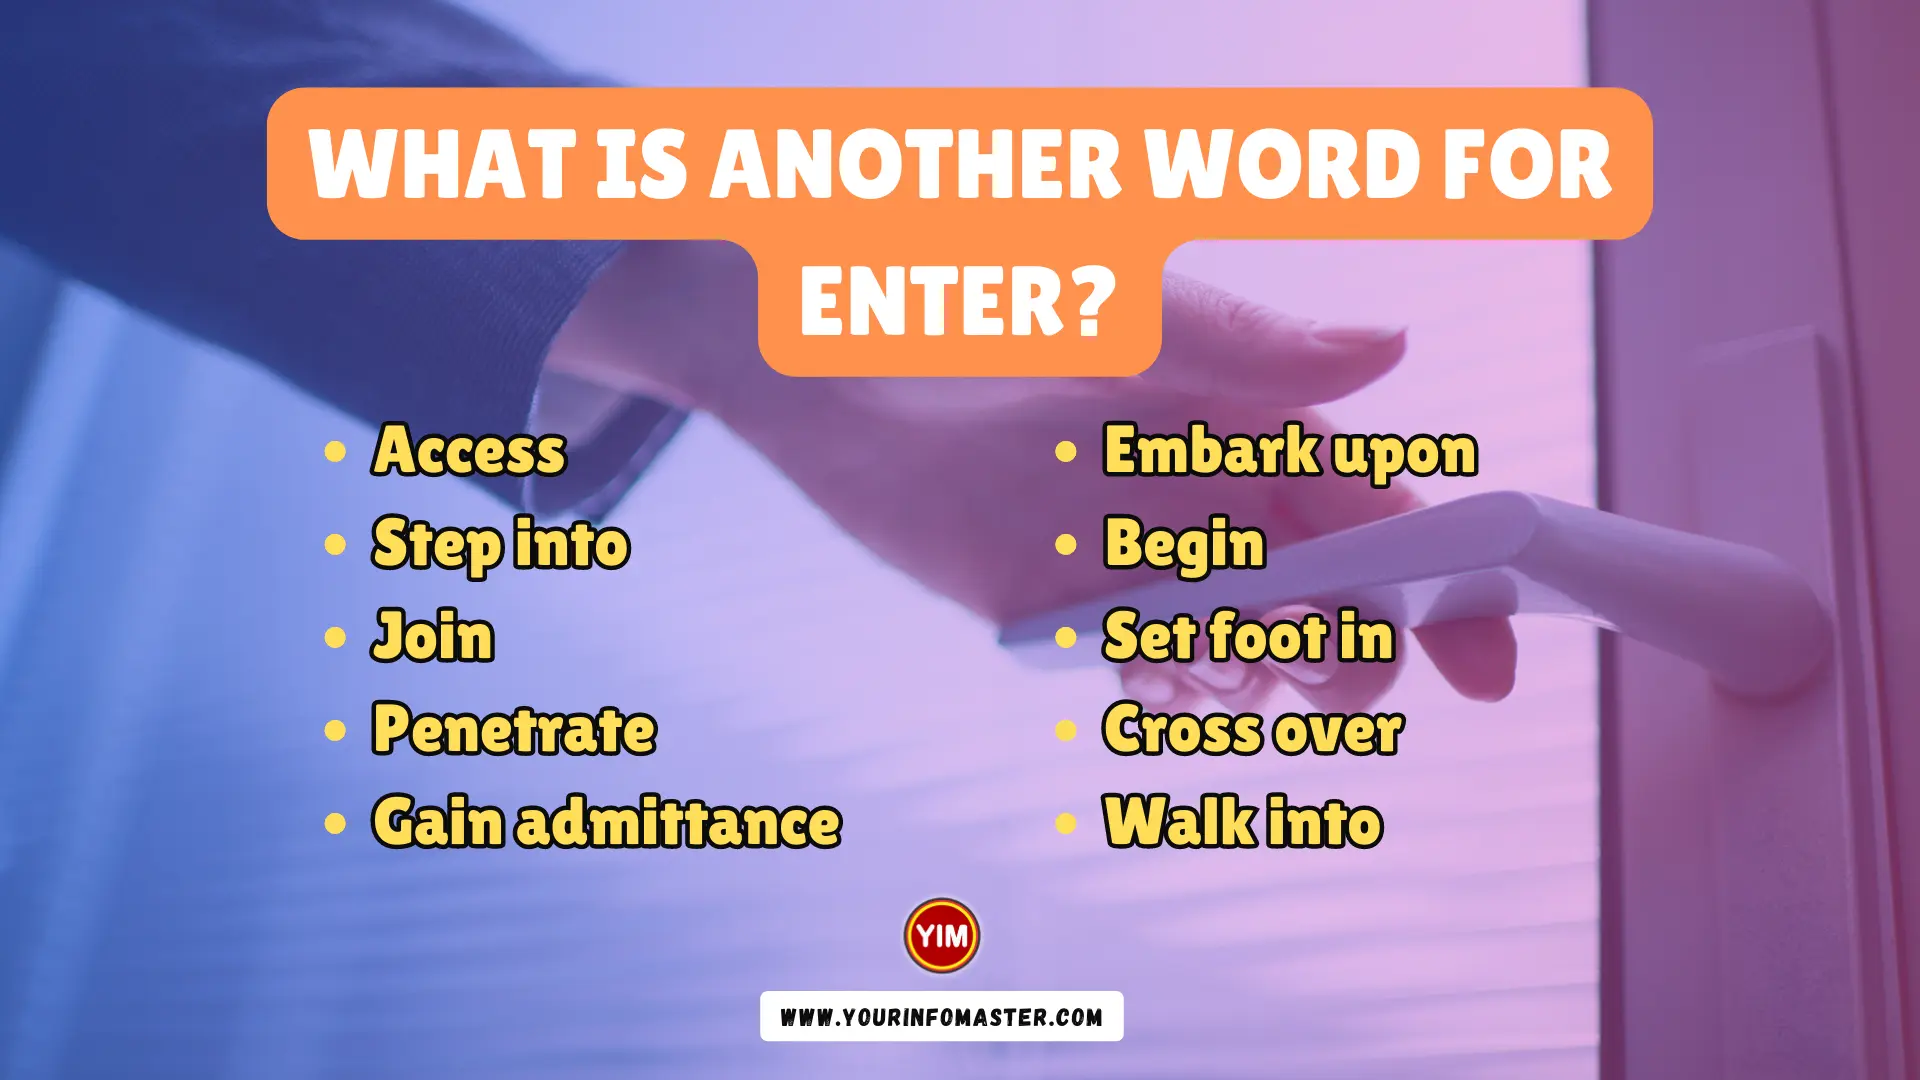 What is another word for Enter